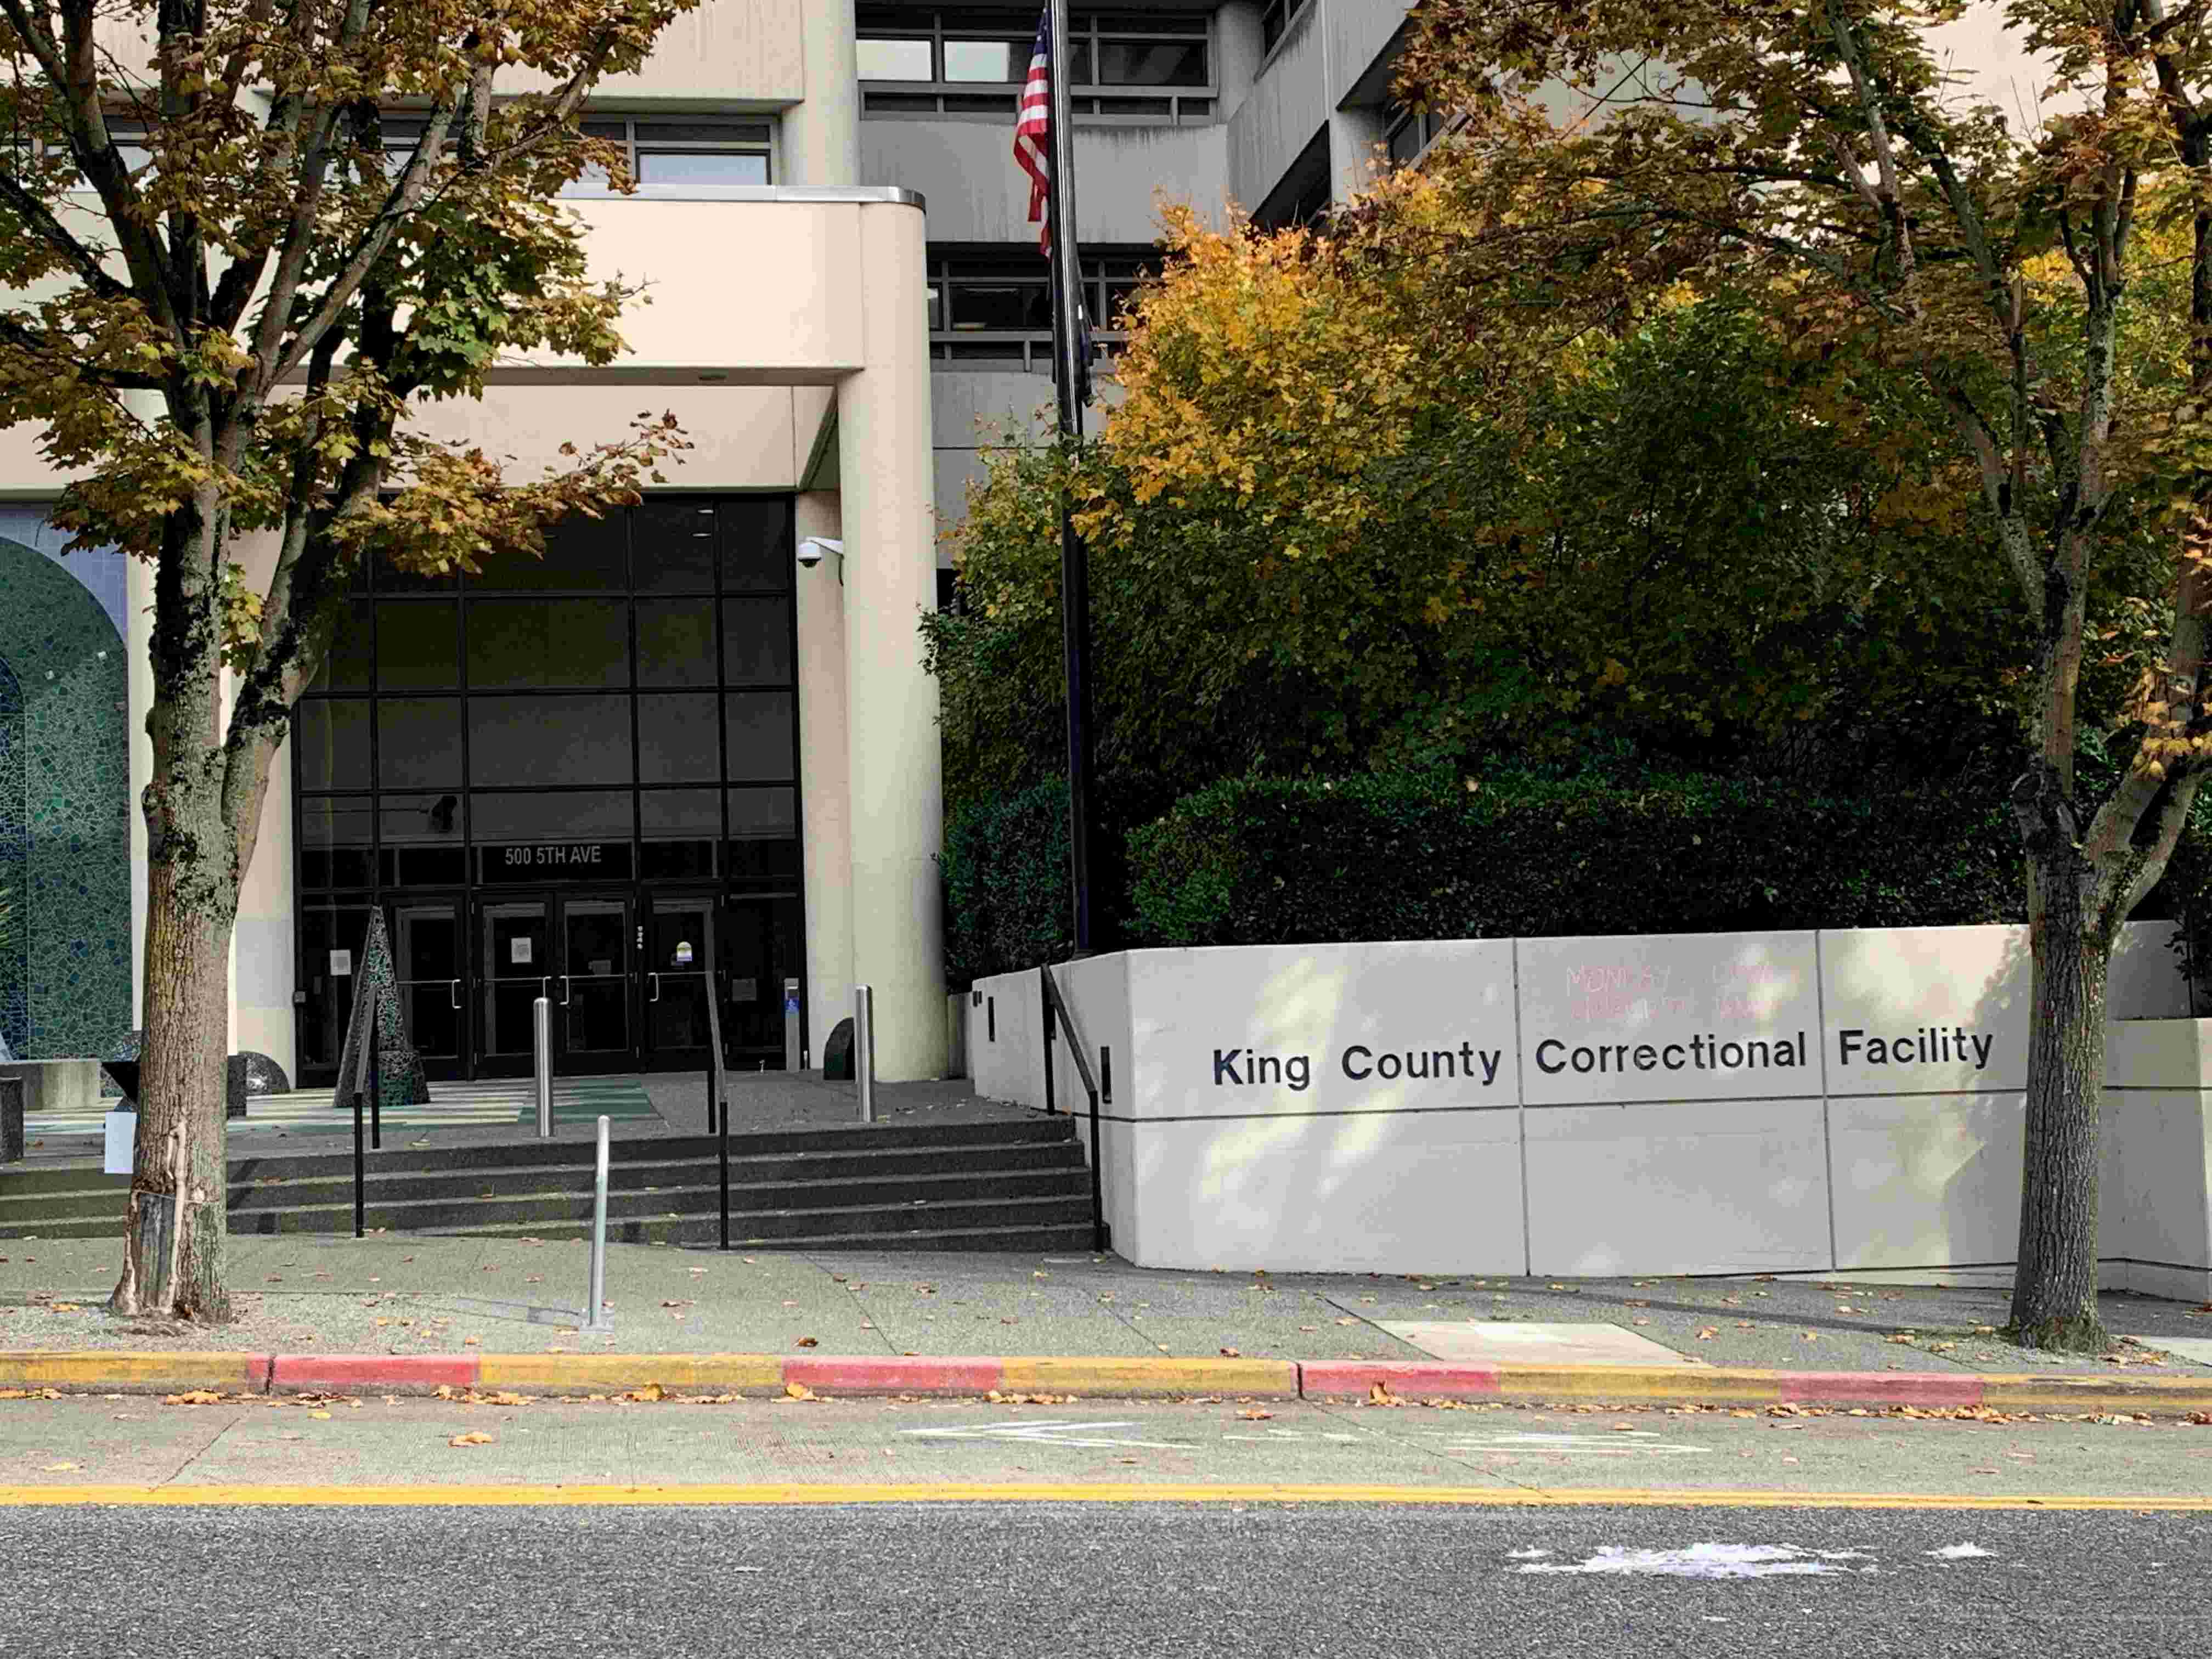 Street view of the entrance to the King County Correctional Facility building in Seattle